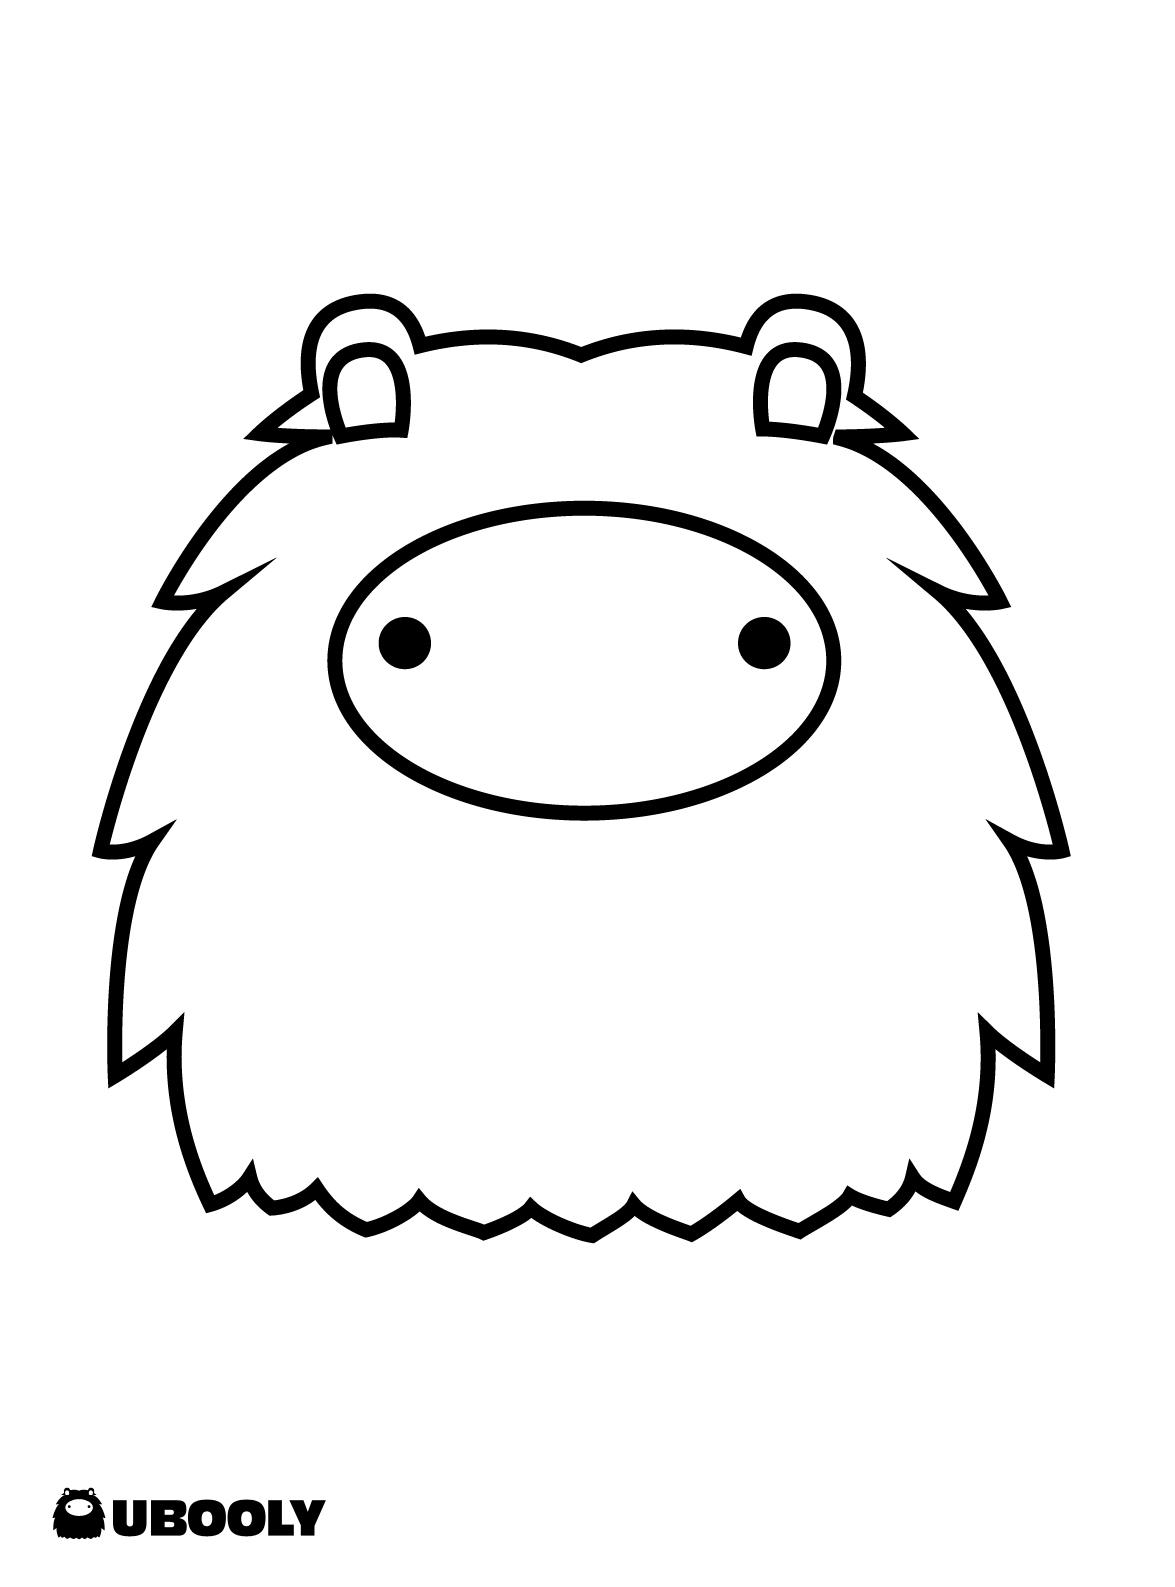 Free Coloring Pages for Kids | Ubooly